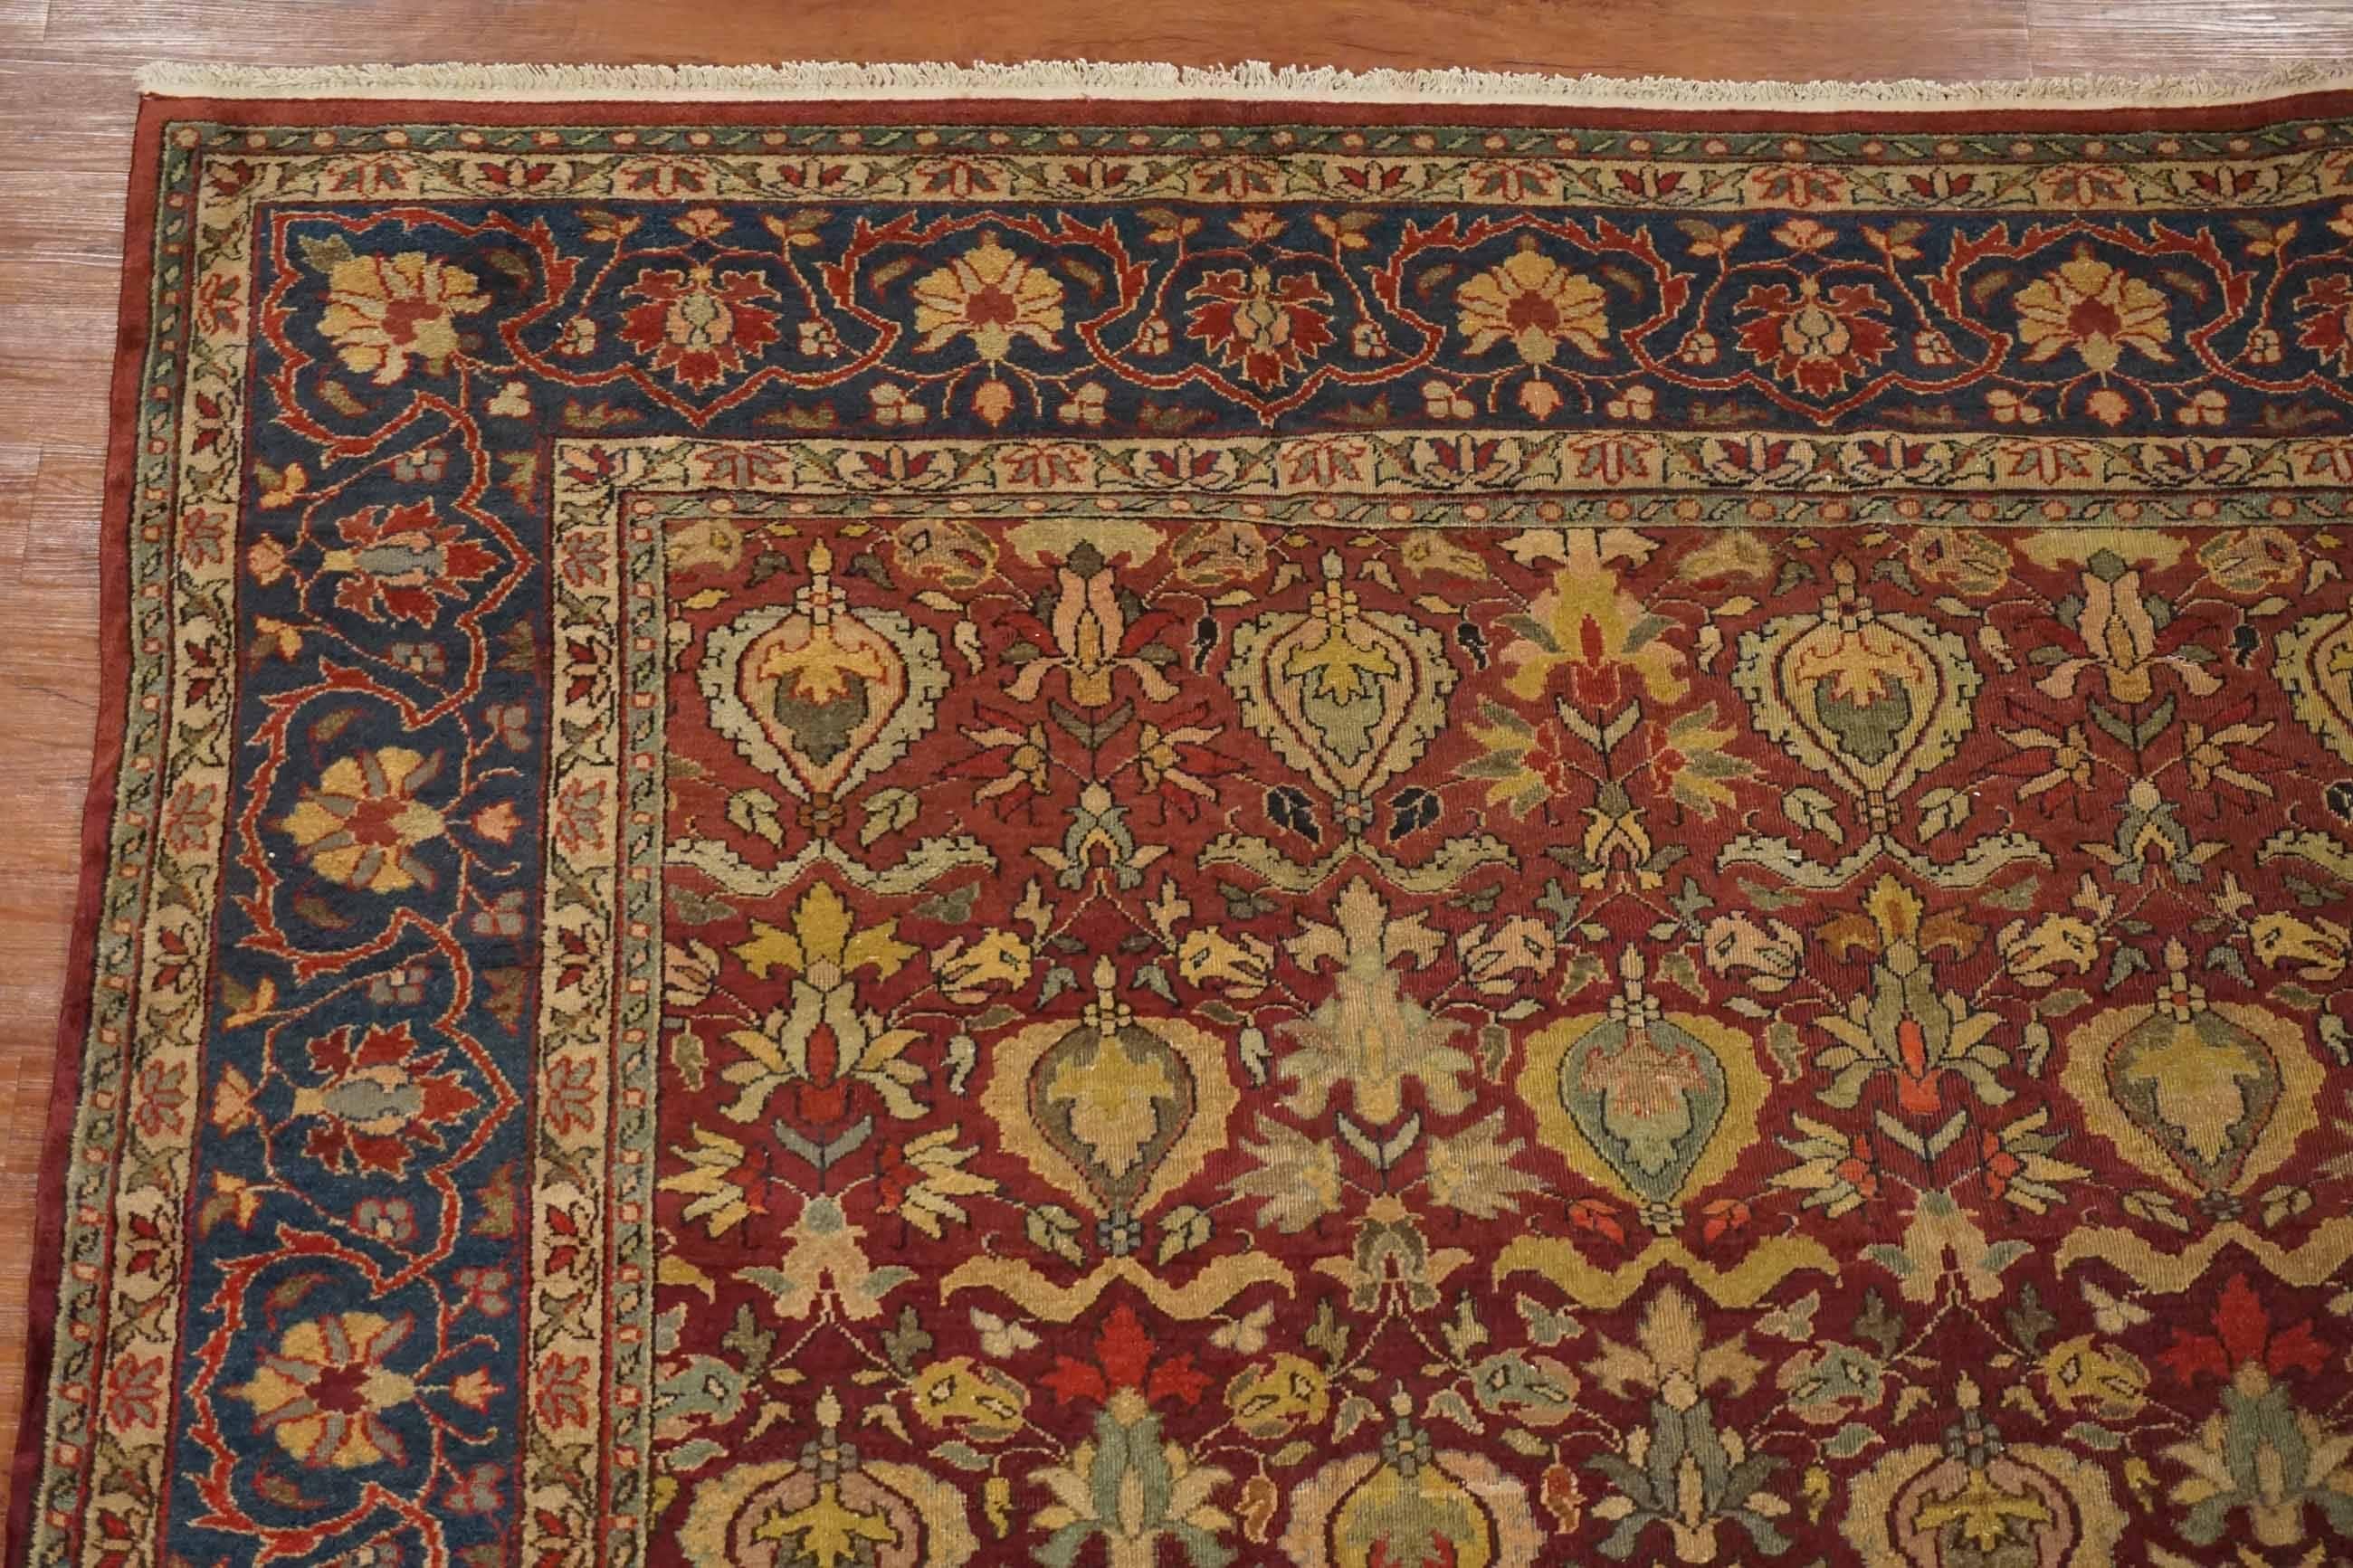 Antique Burgundy Indian Agra Rug, circa 1900 In Good Condition For Sale In Northridge, CA